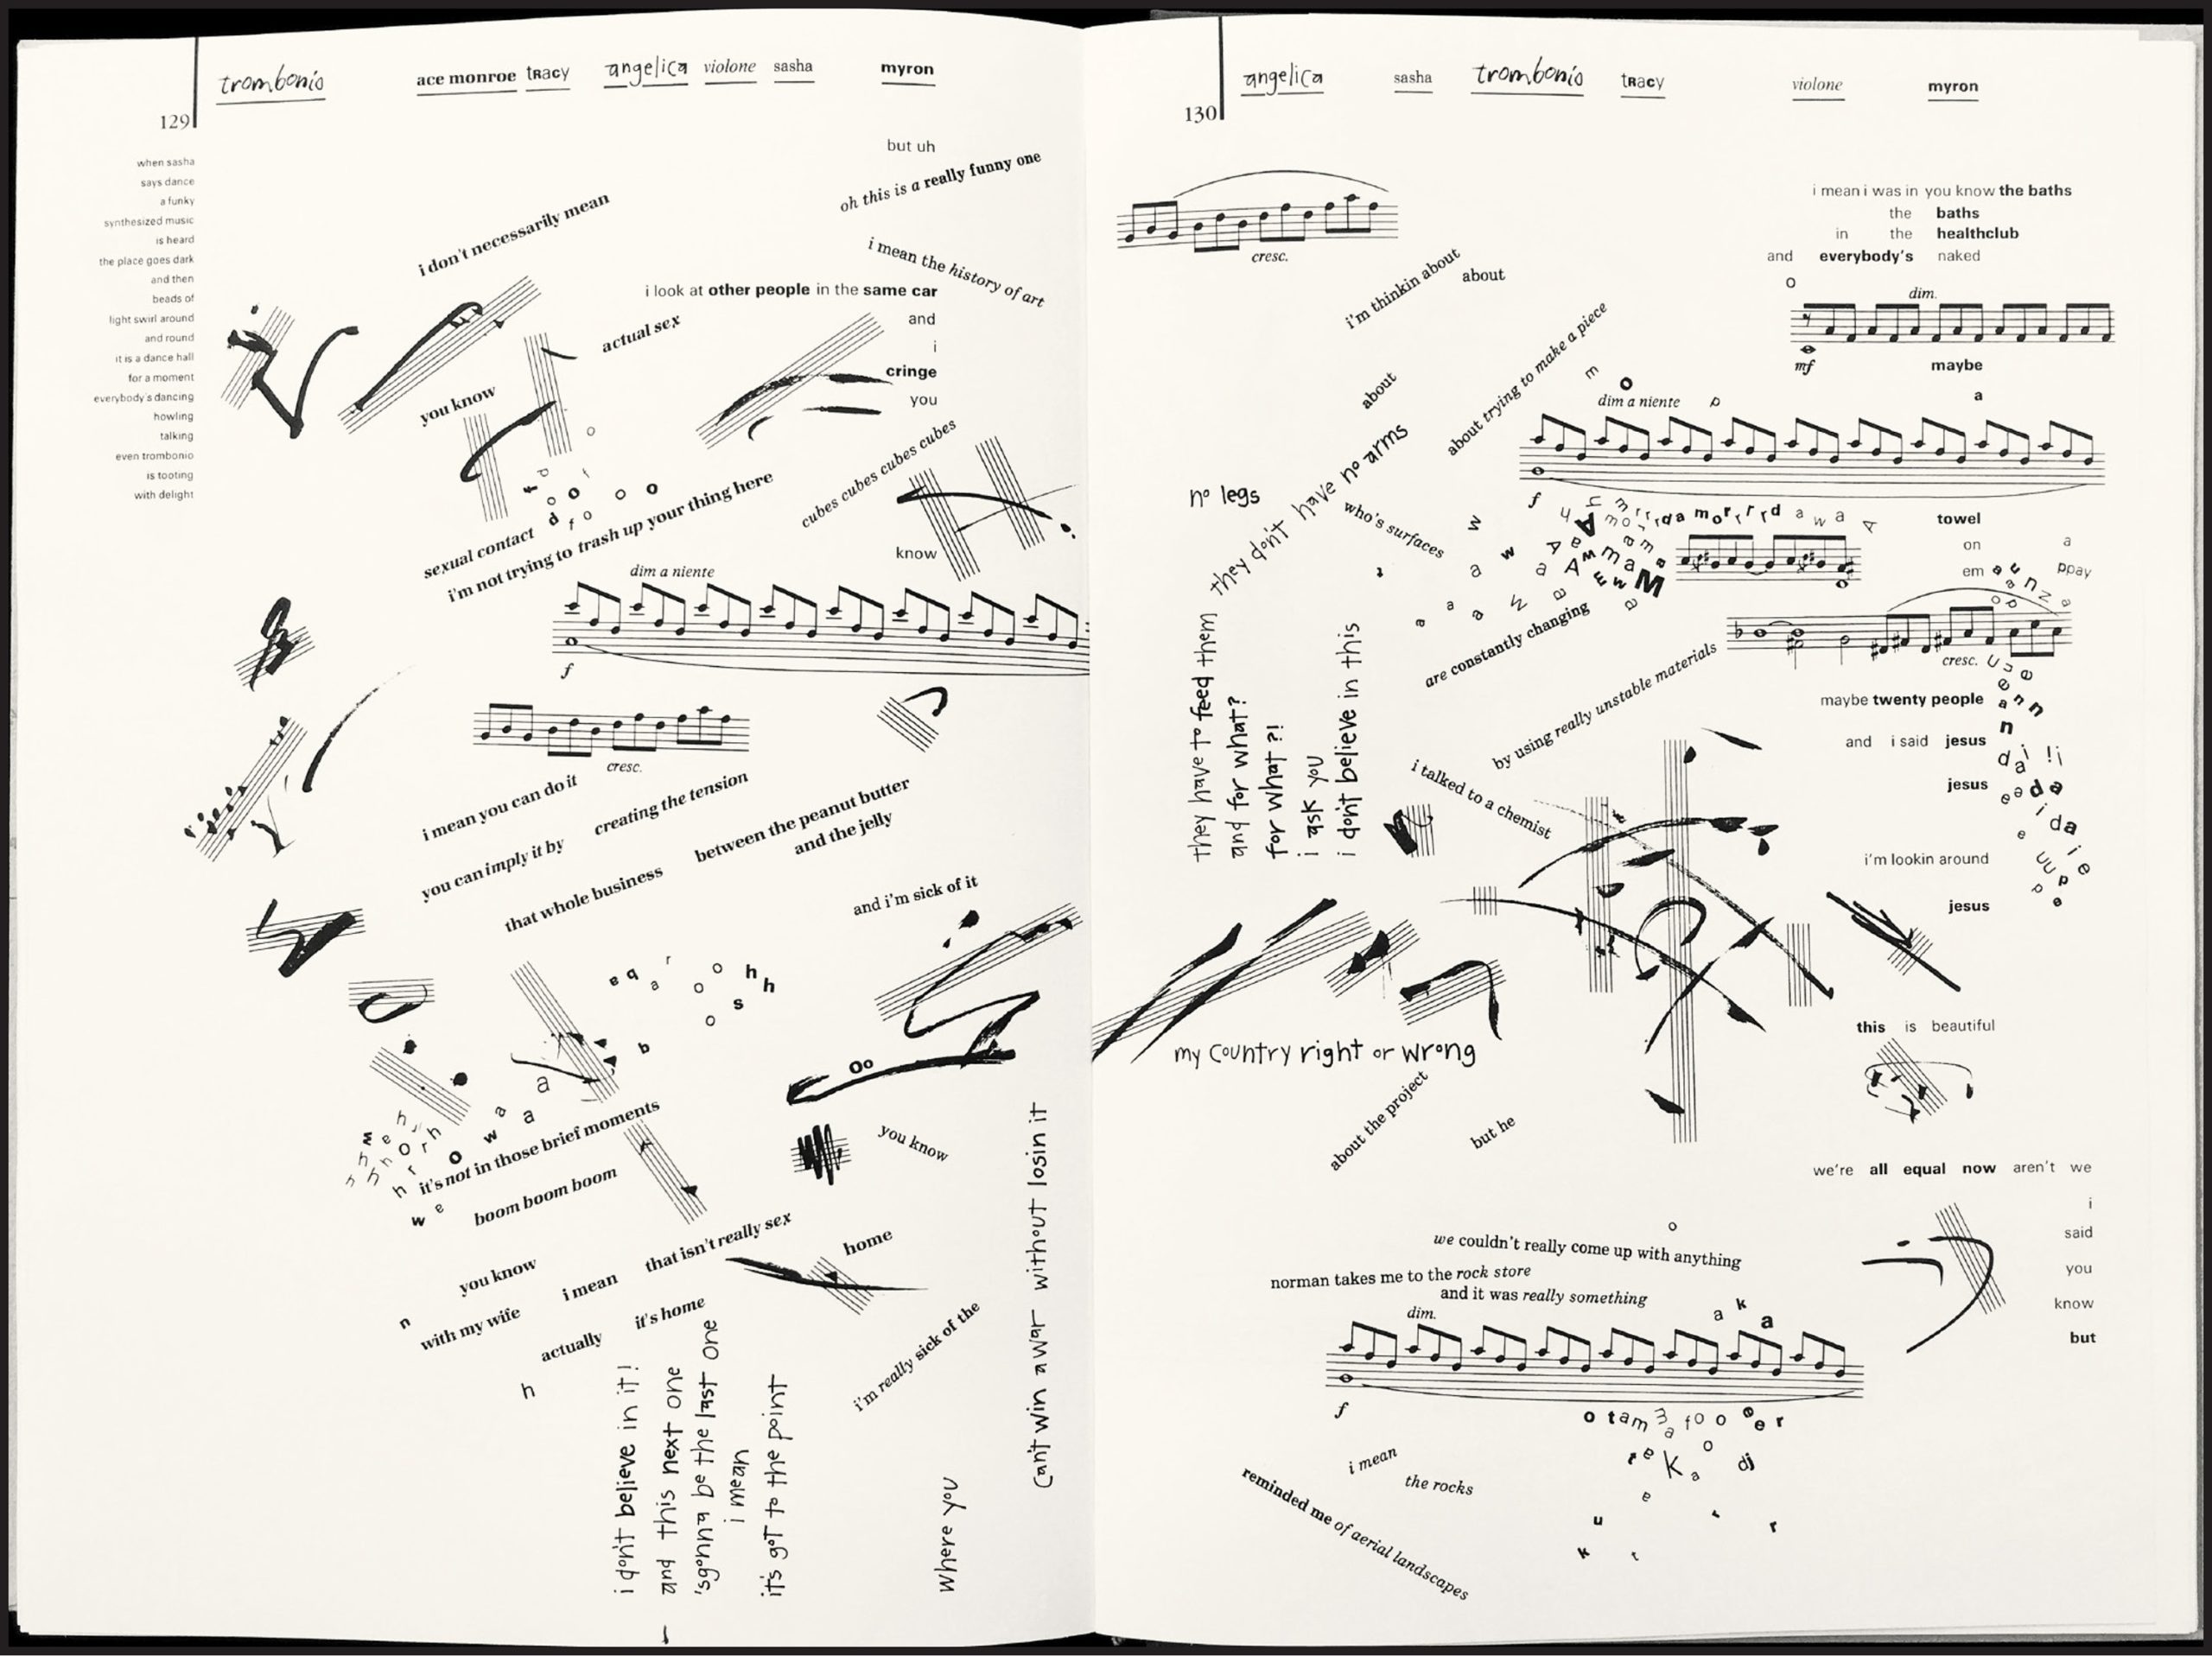 Book spread showing musical notes